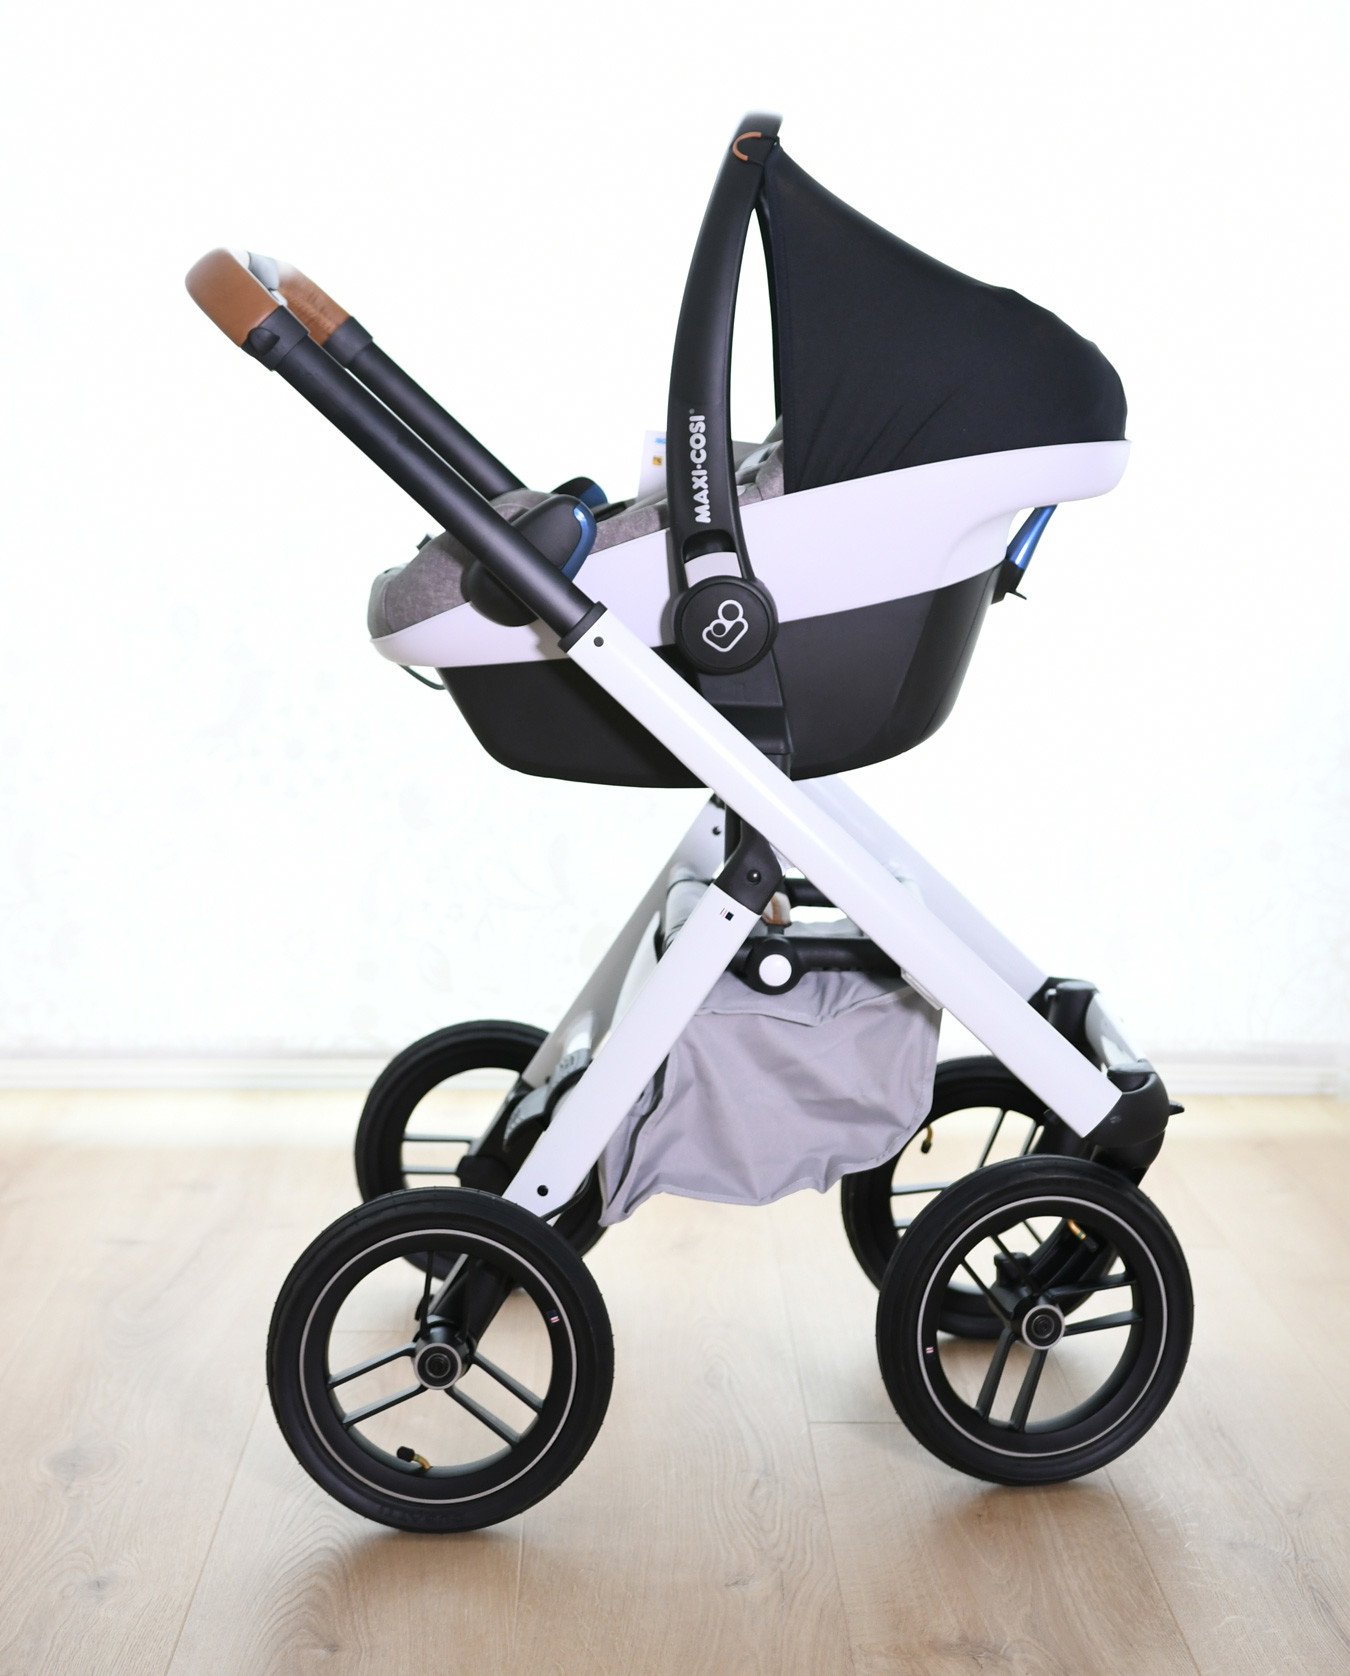 Maxi-Cosi Pebble car seat attached to stroller base